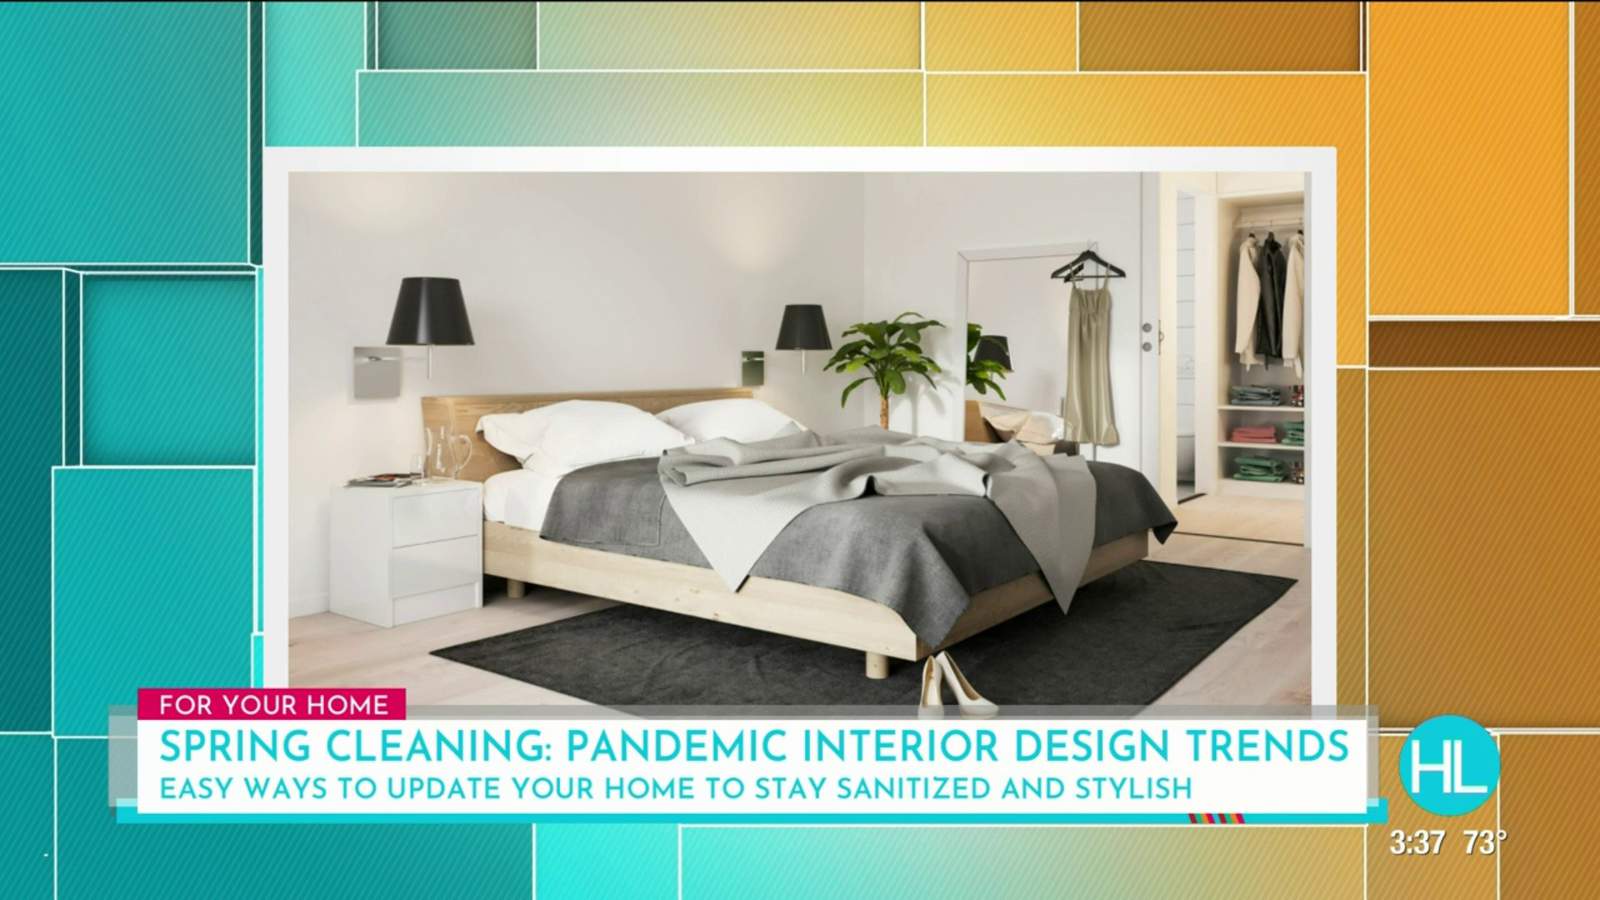 Spring clean style: Houston designer shares tips to keep your home sanitized and stylish year-round